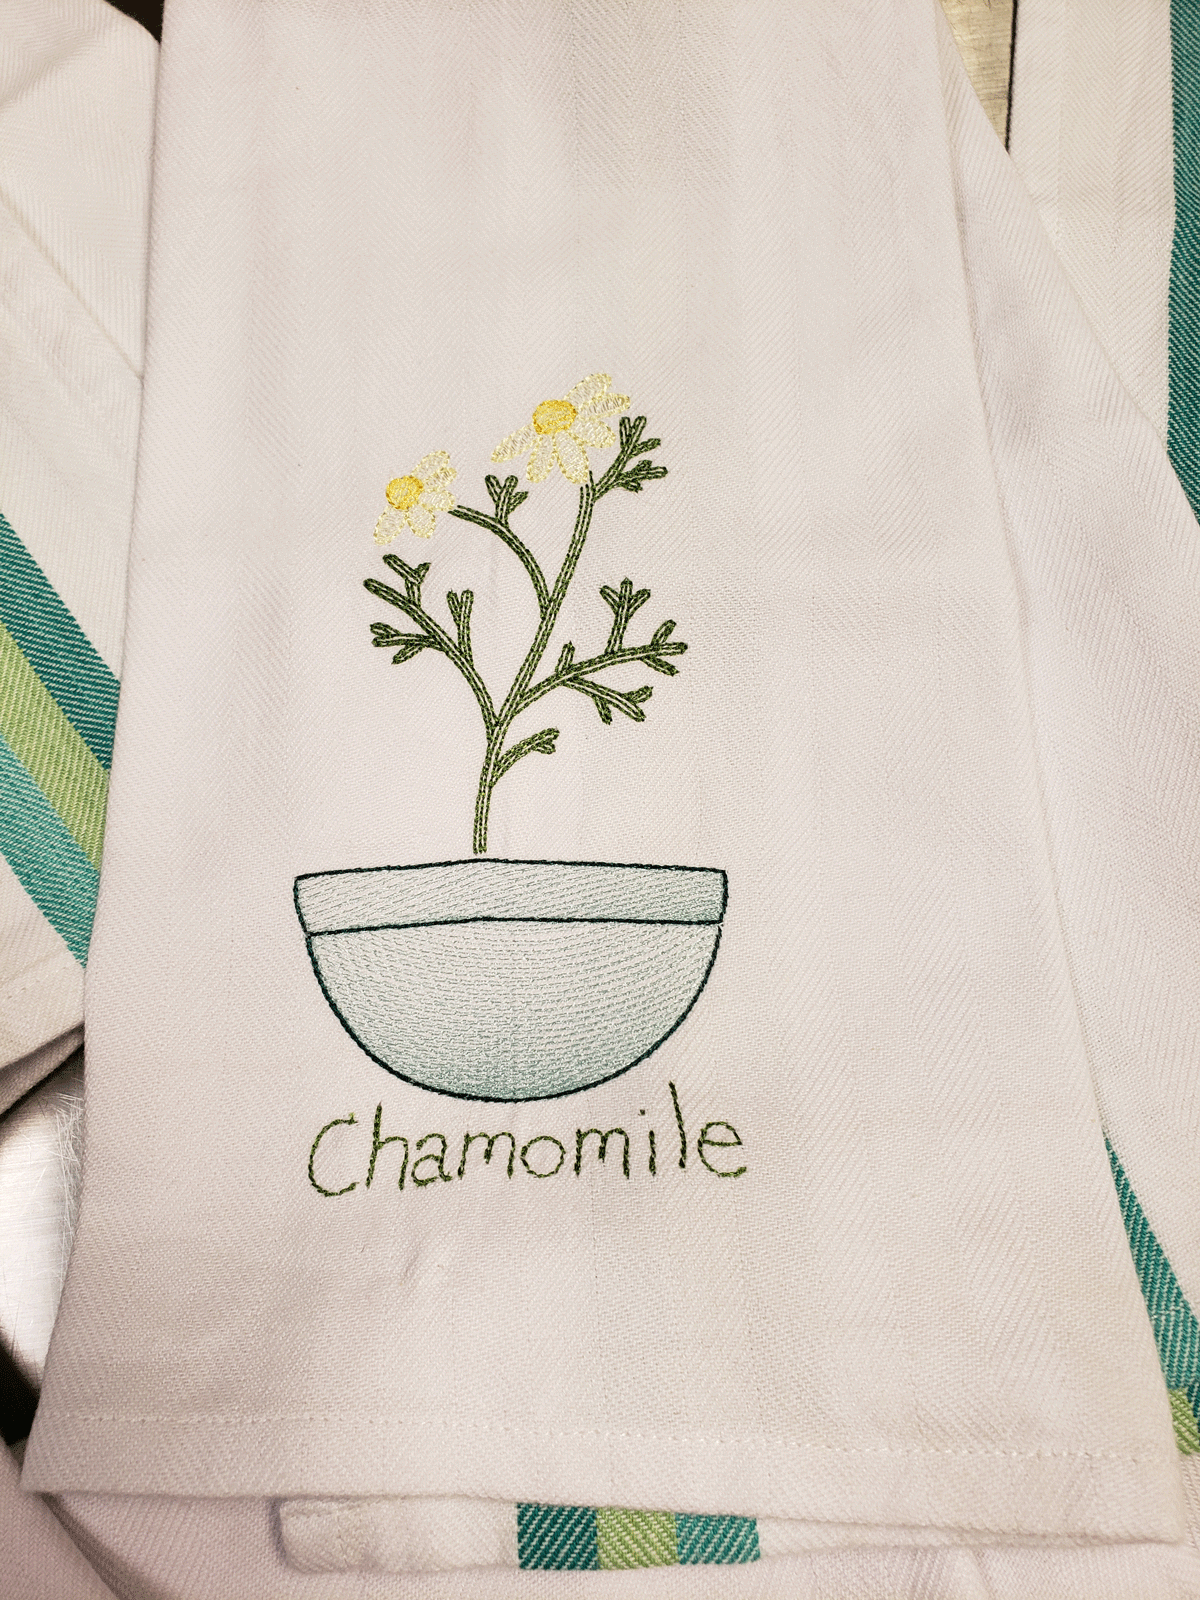 https://diannesews.com/wp-content/uploads/2021/02/embroidered-kitchen-towel-camomile.png